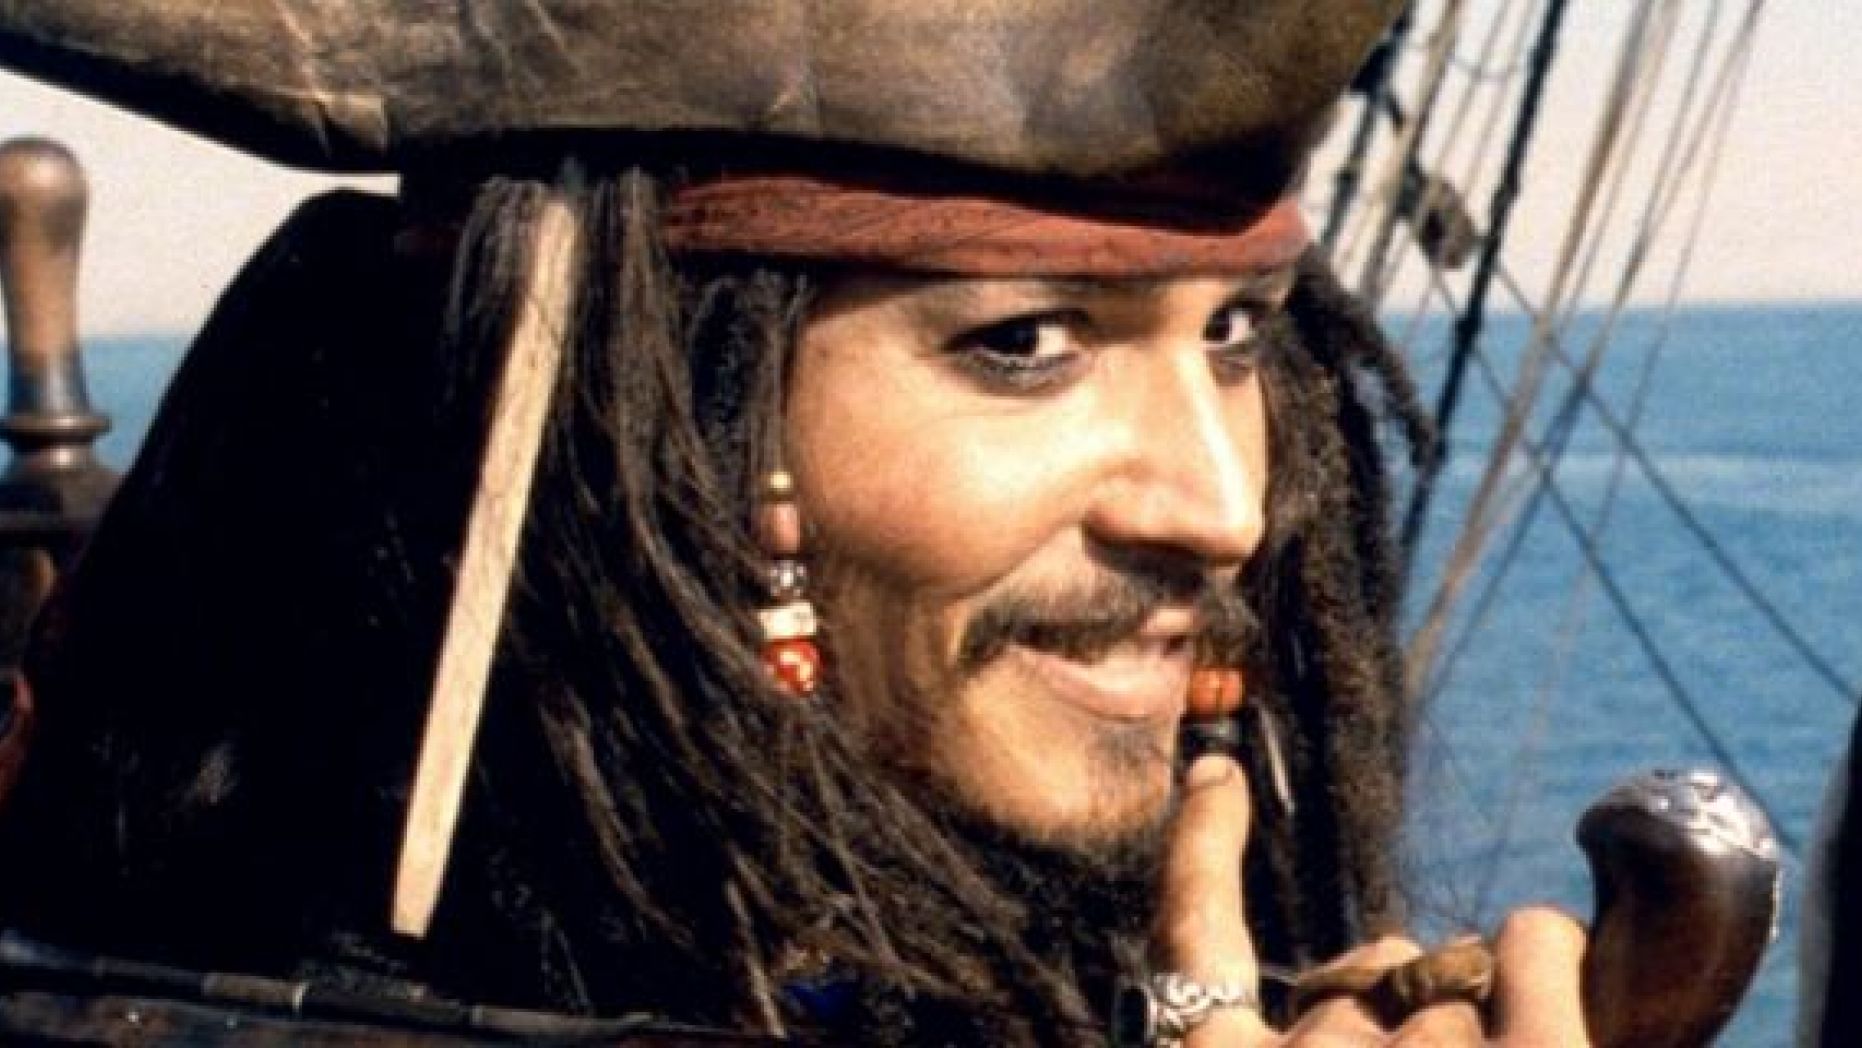 Johnny Depp as Captain Jack Sparrow in "Pirates of the Caribbean."